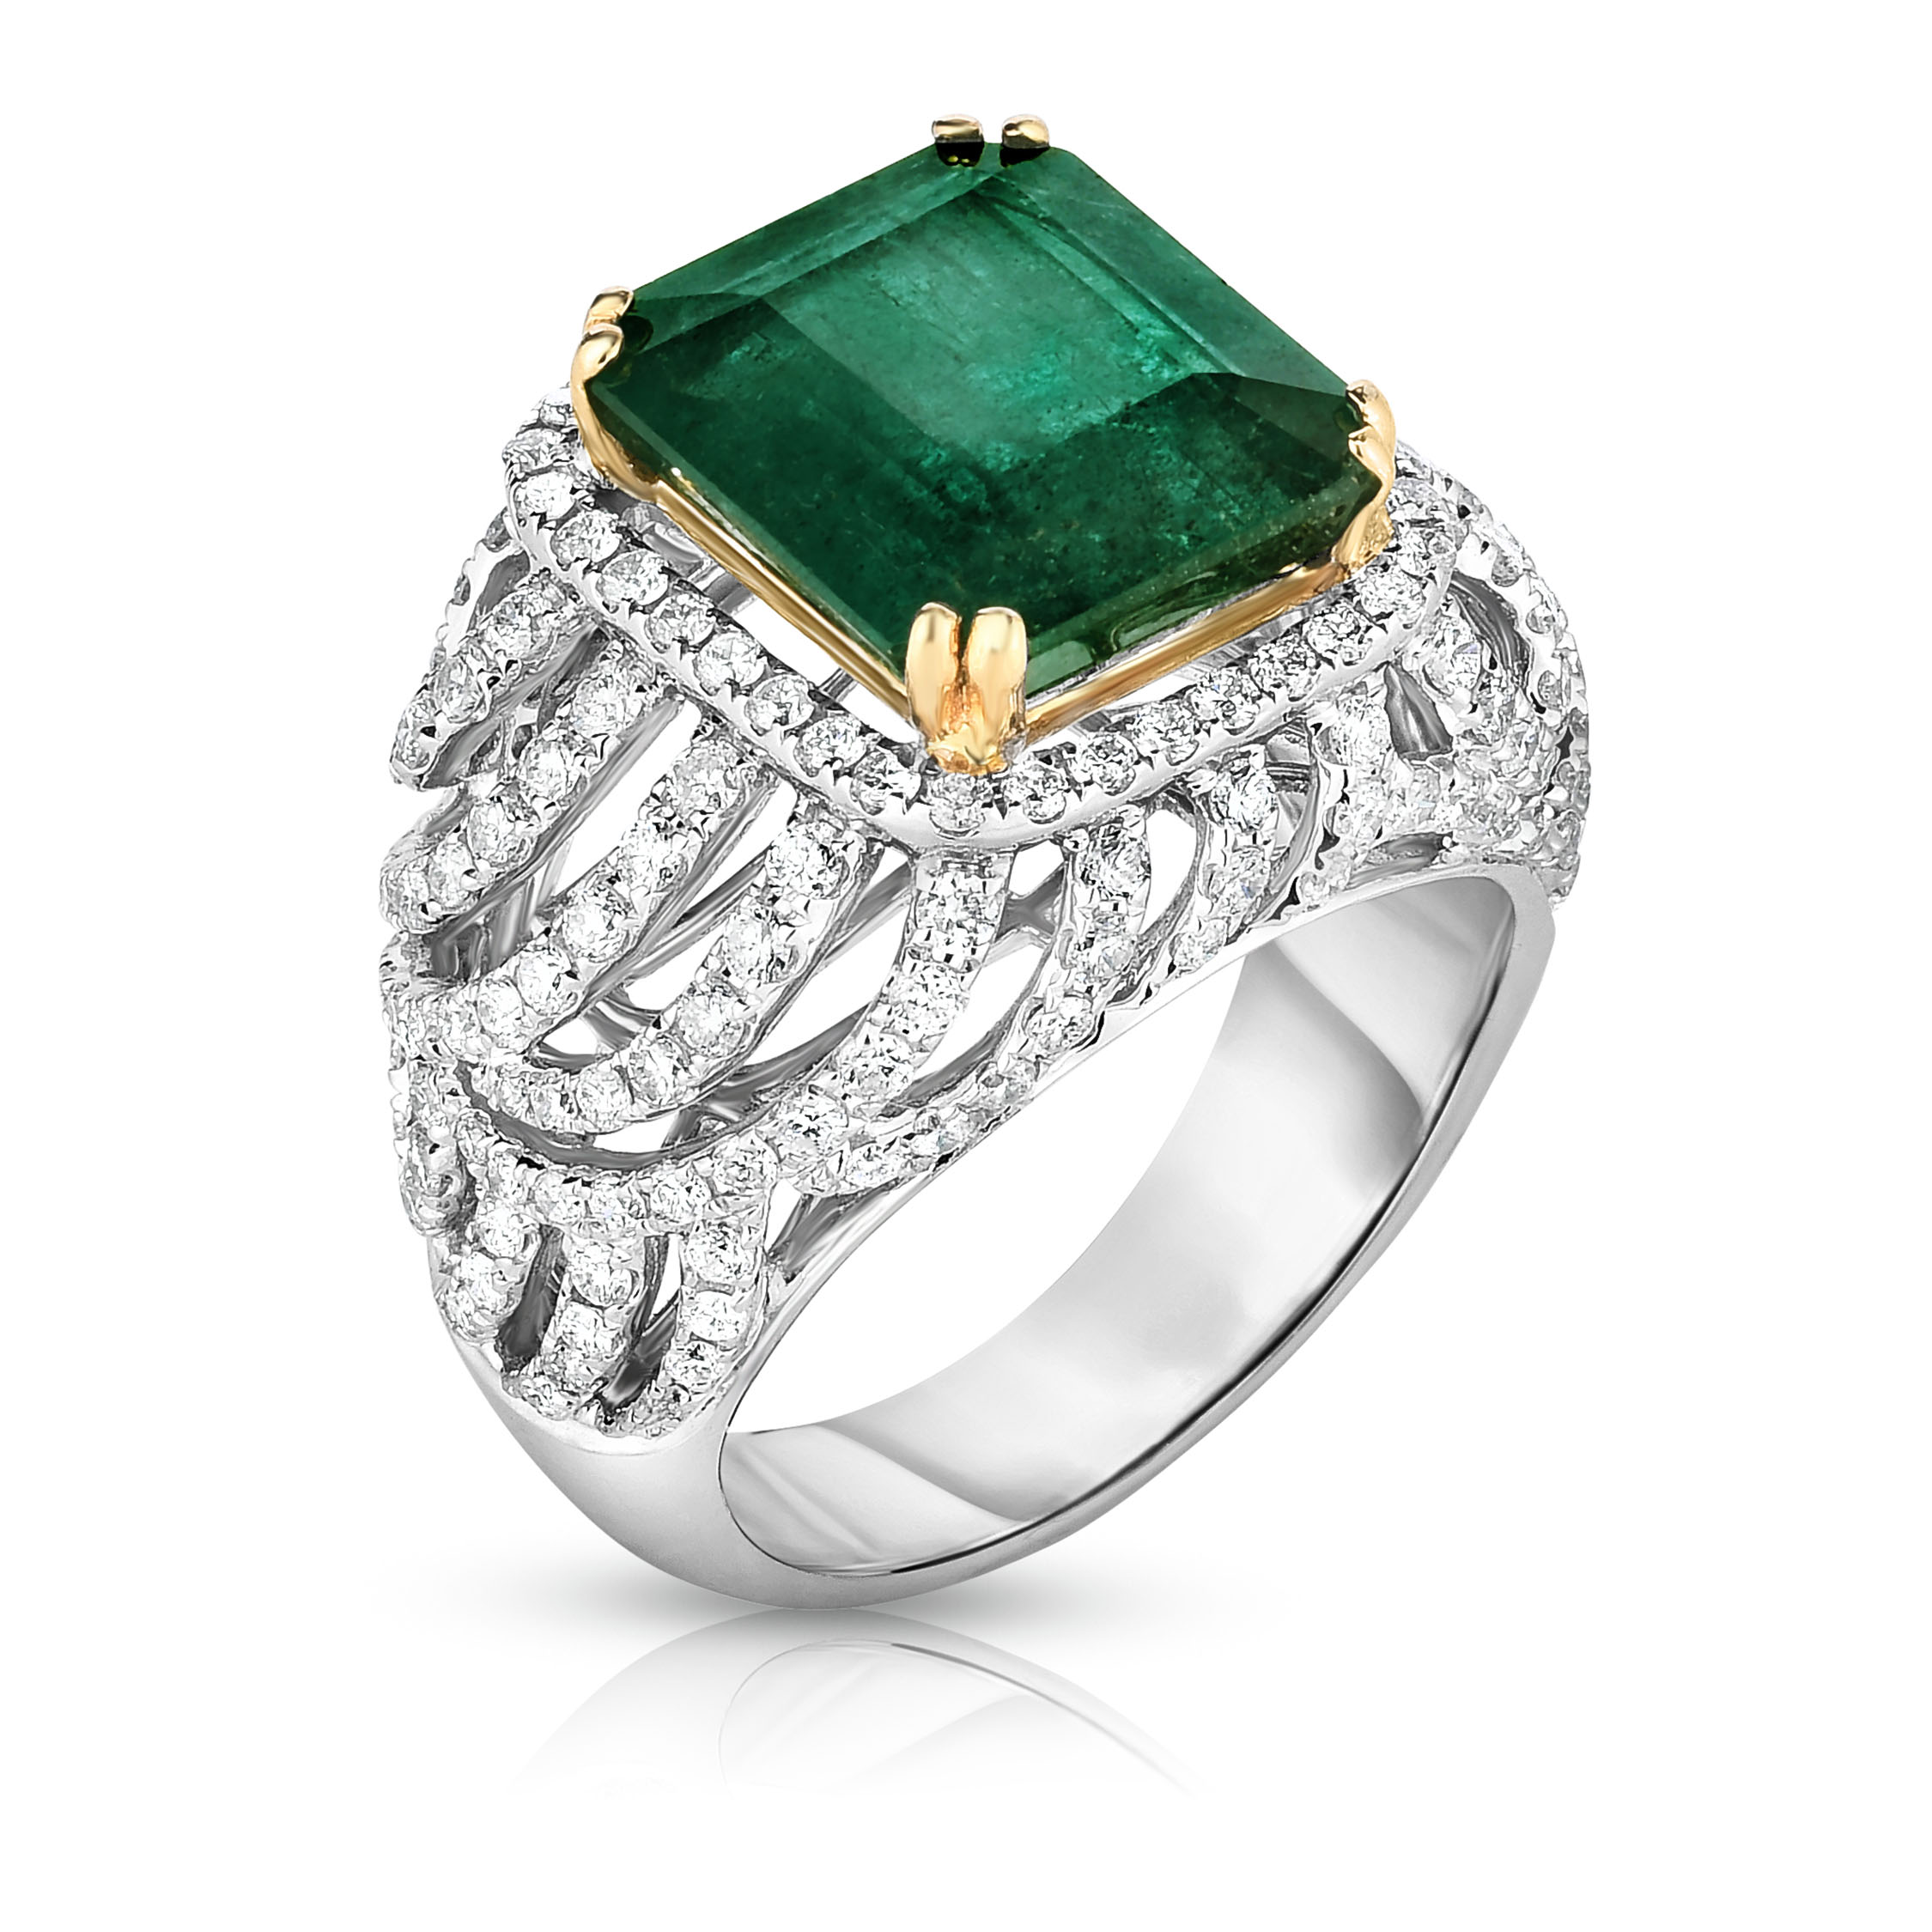 Square emerald and diamond engagement ring